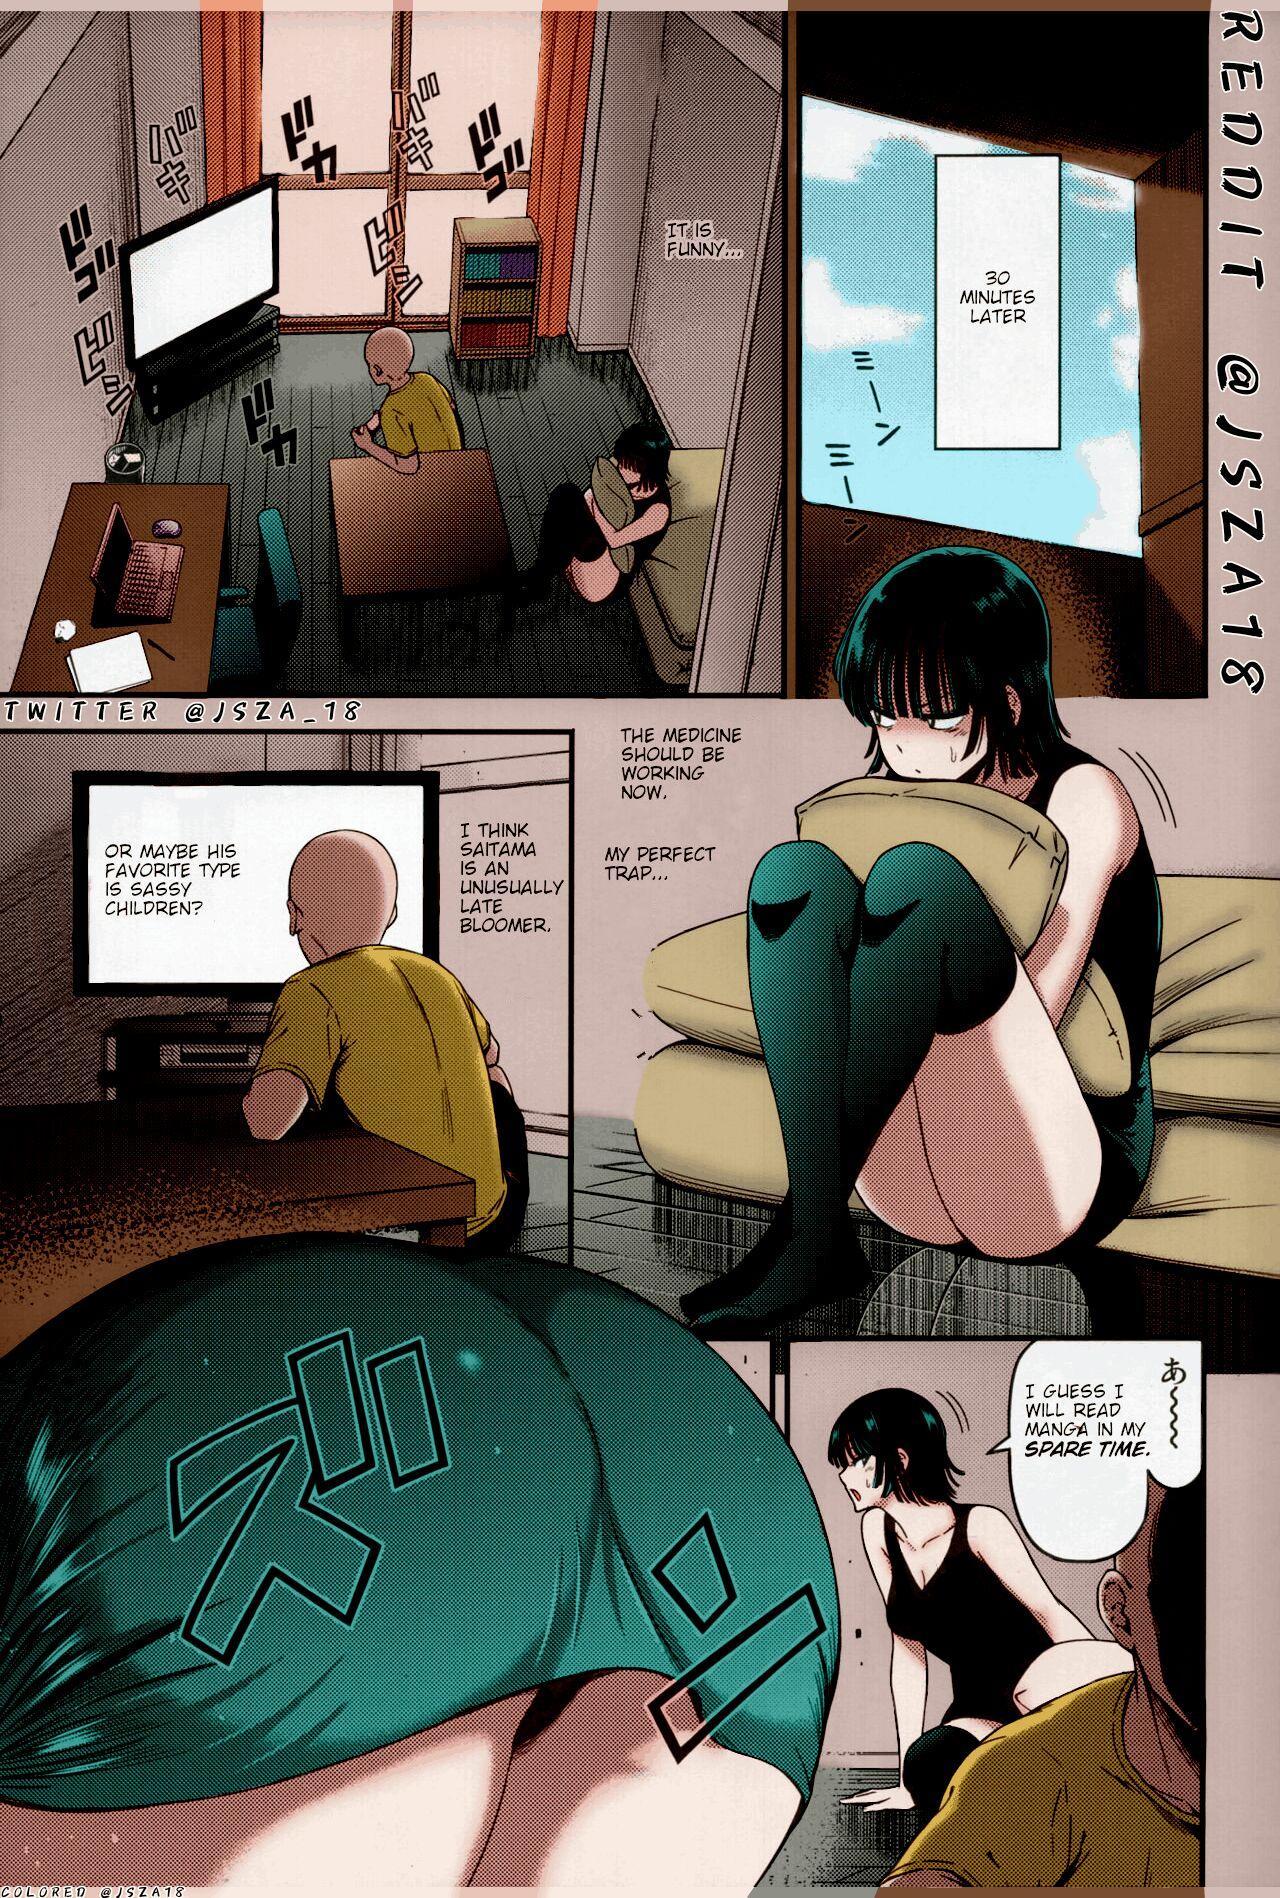 Real Orgasms ONE-HURRICANE 6 - One punch man Amateur Porno - Page 6